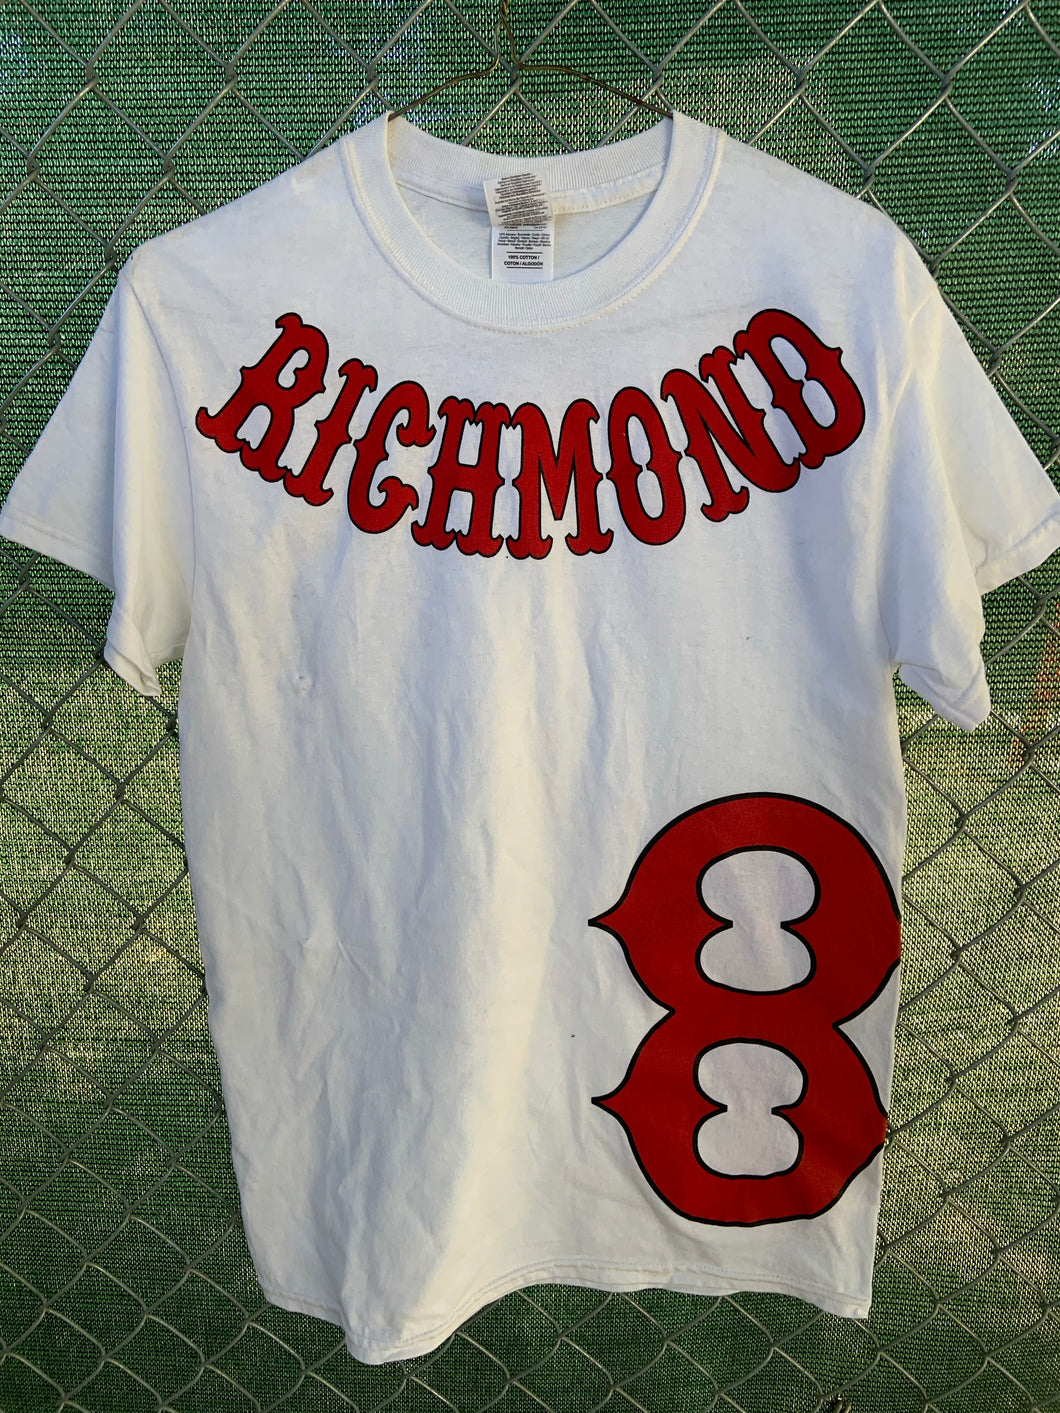 White shirt with red richmond on collar